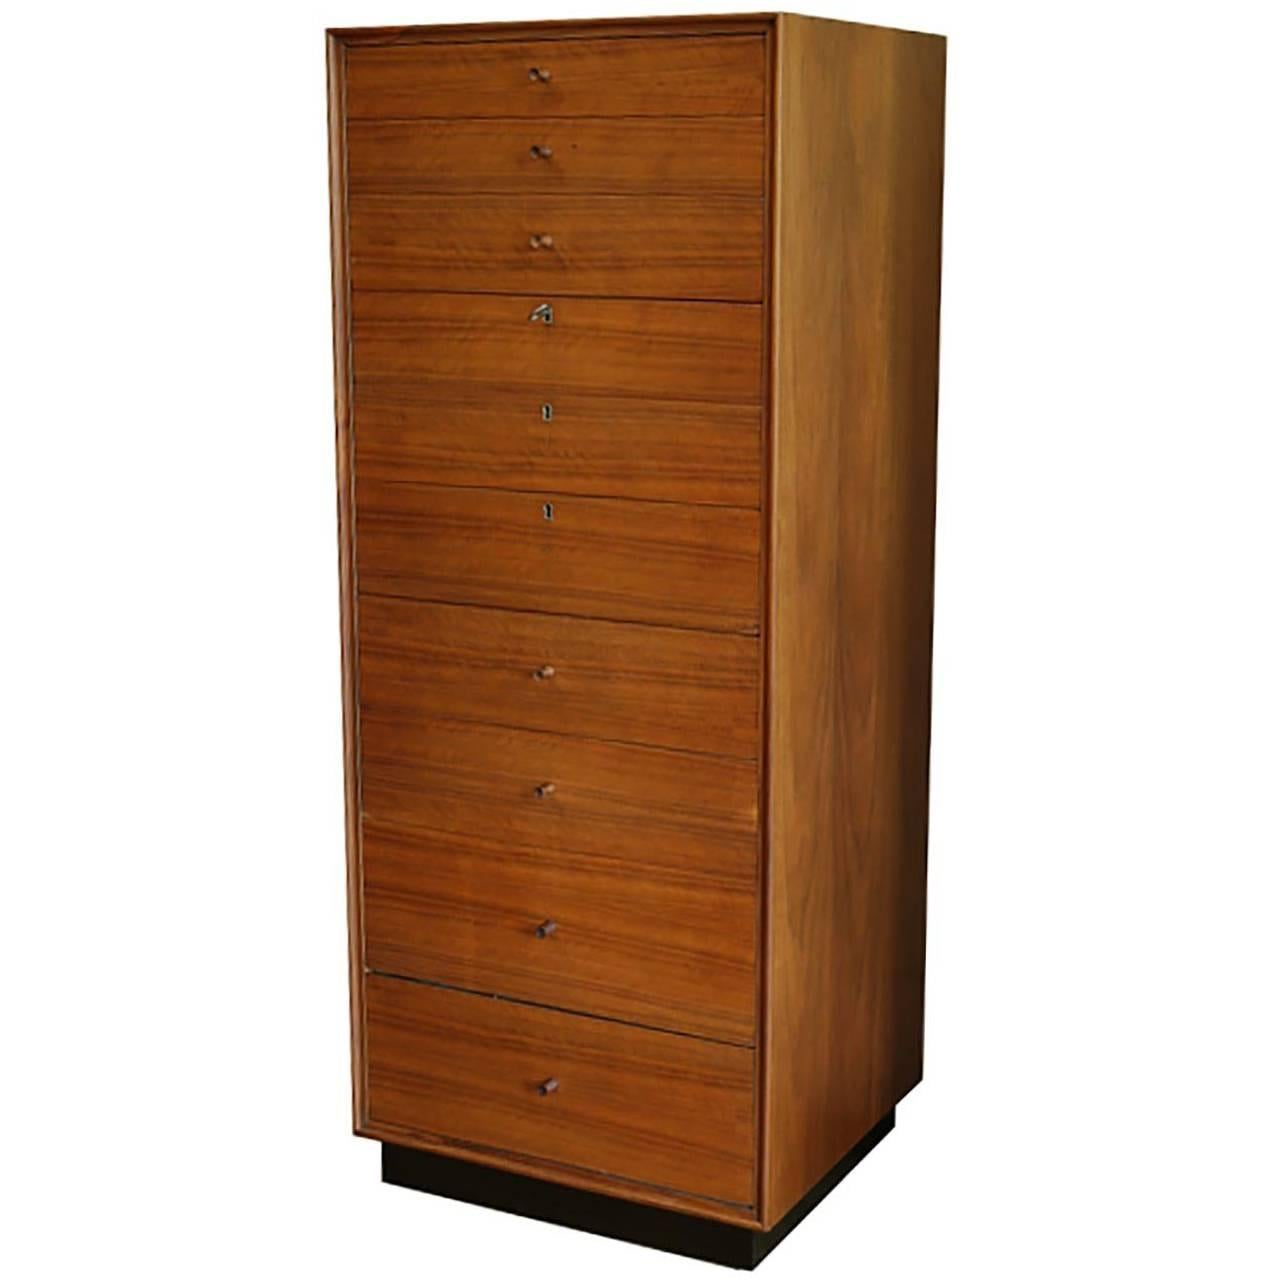 MCM Walnut Chest of Drawers with Rosewood Pulls by Glenn of California c. 1950s